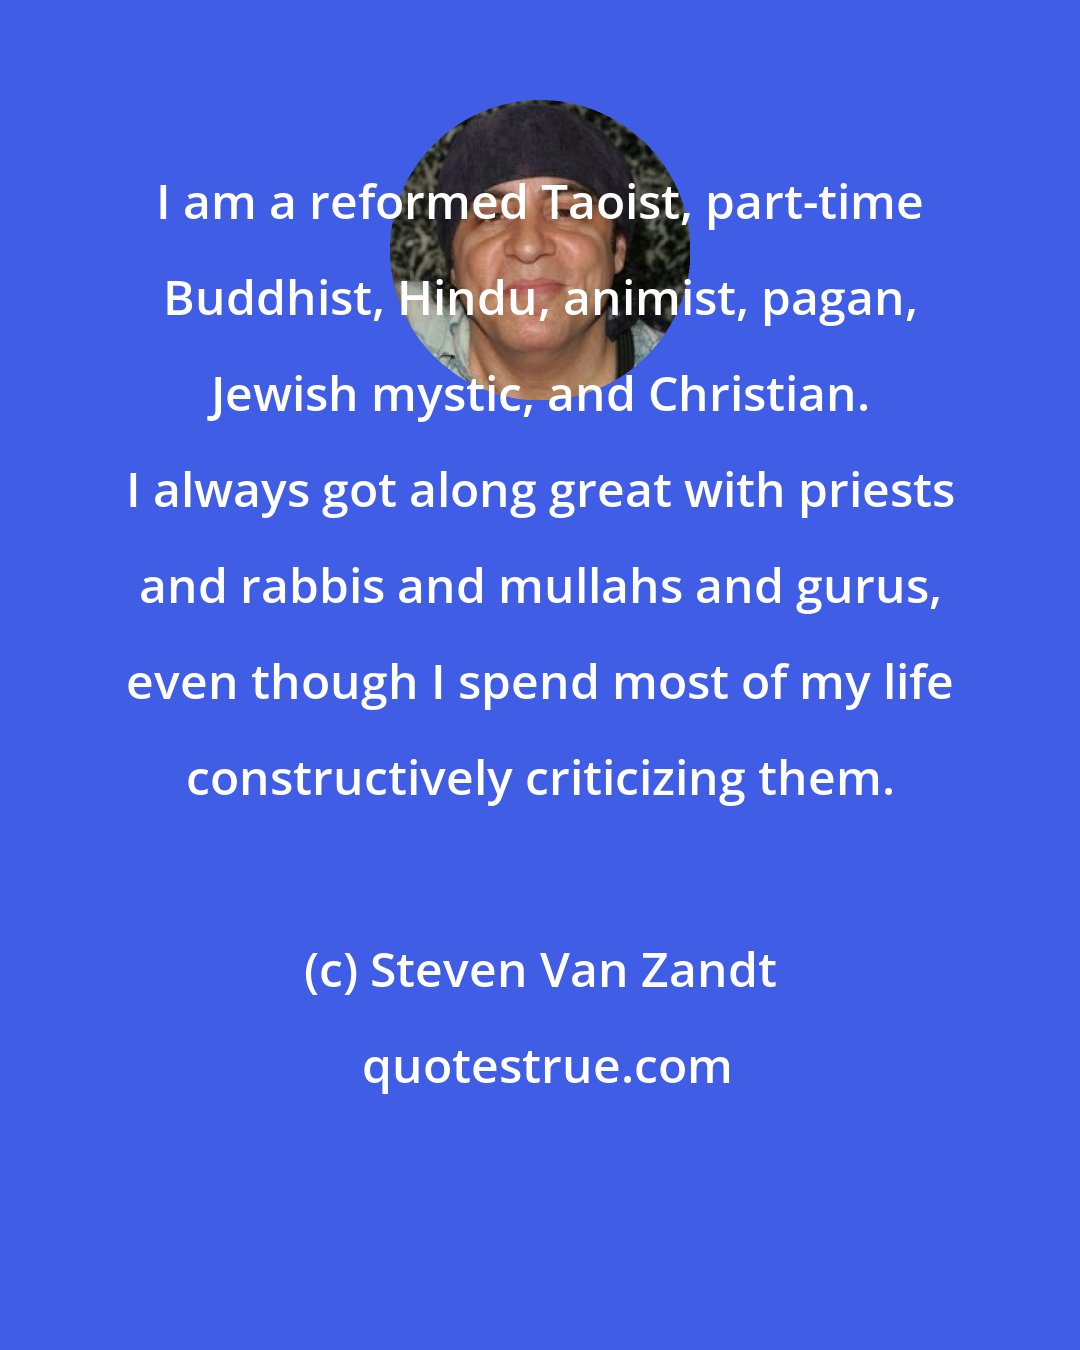 Steven Van Zandt: I am a reformed Taoist, part-time Buddhist, Hindu, animist, pagan, Jewish mystic, and Christian. I always got along great with priests and rabbis and mullahs and gurus, even though I spend most of my life constructively criticizing them.